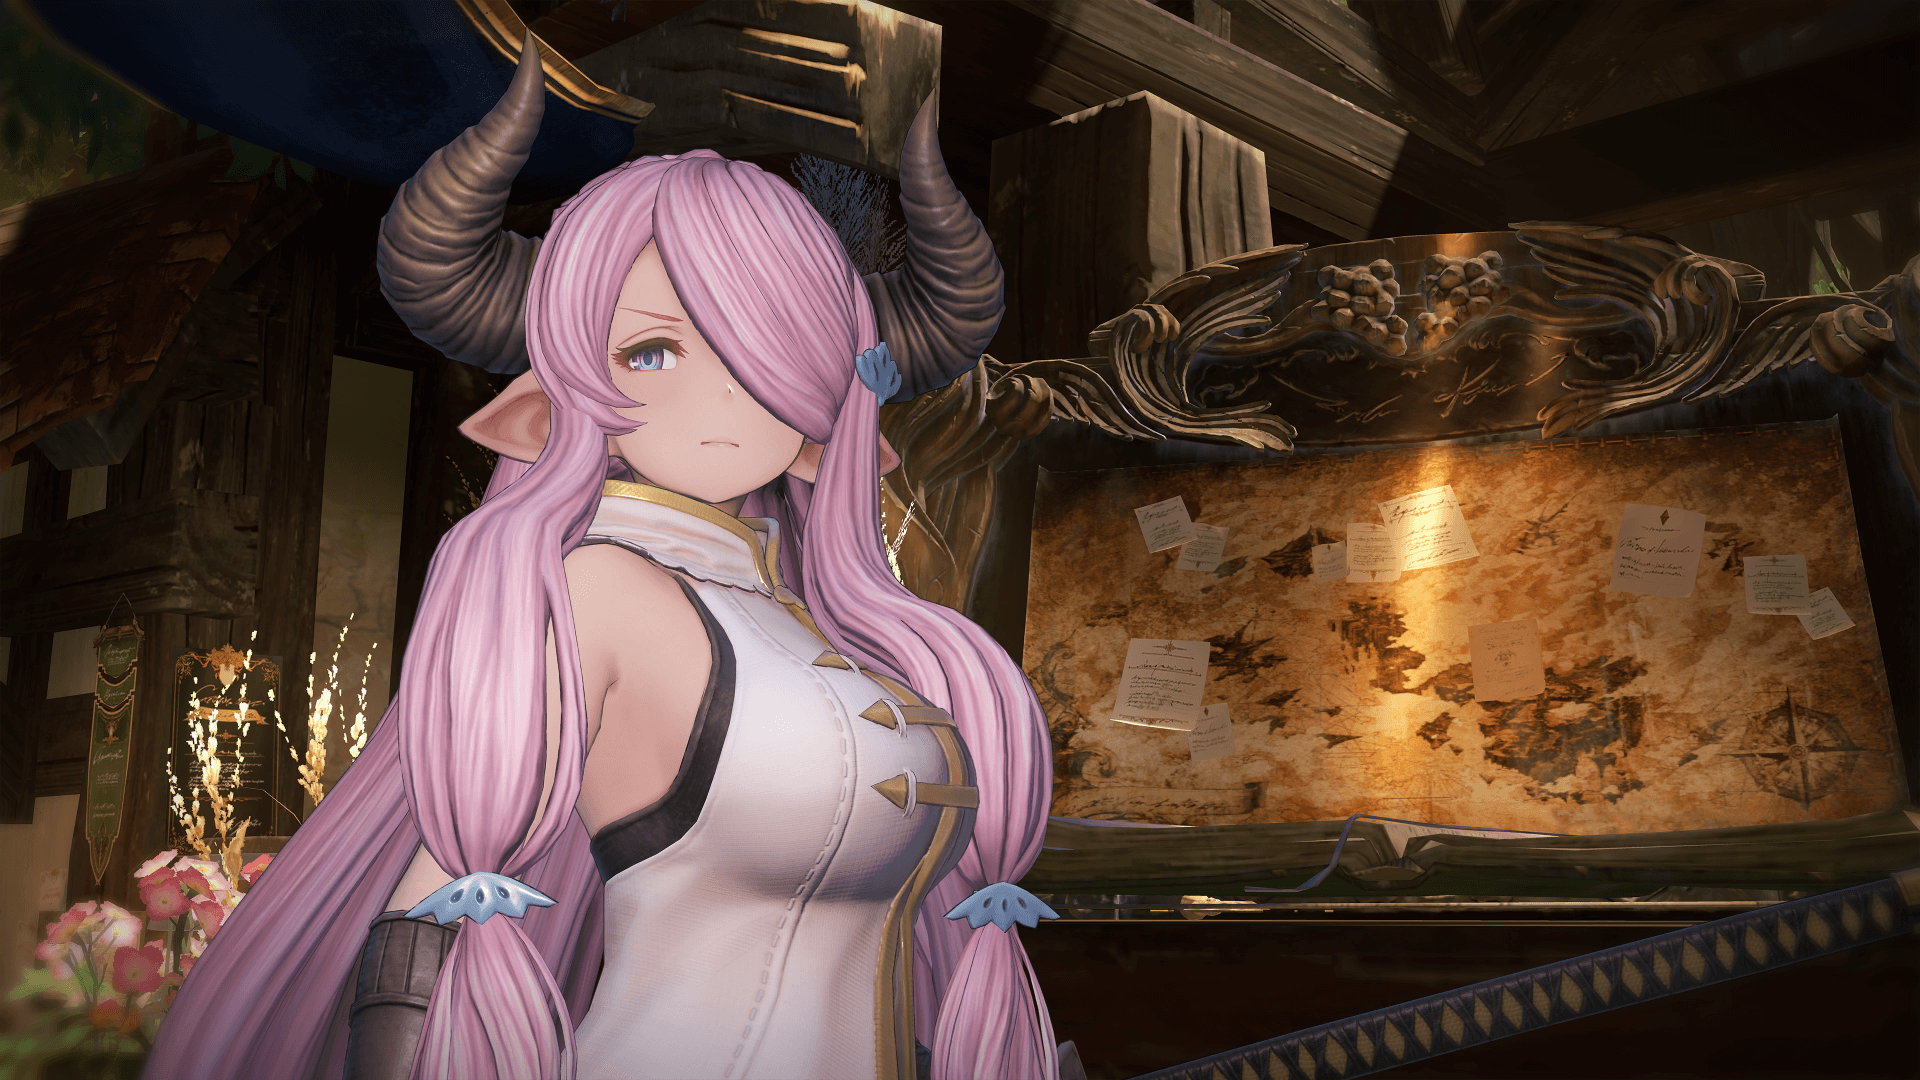 A pink long hair Draph Samurai woman lost in thought.